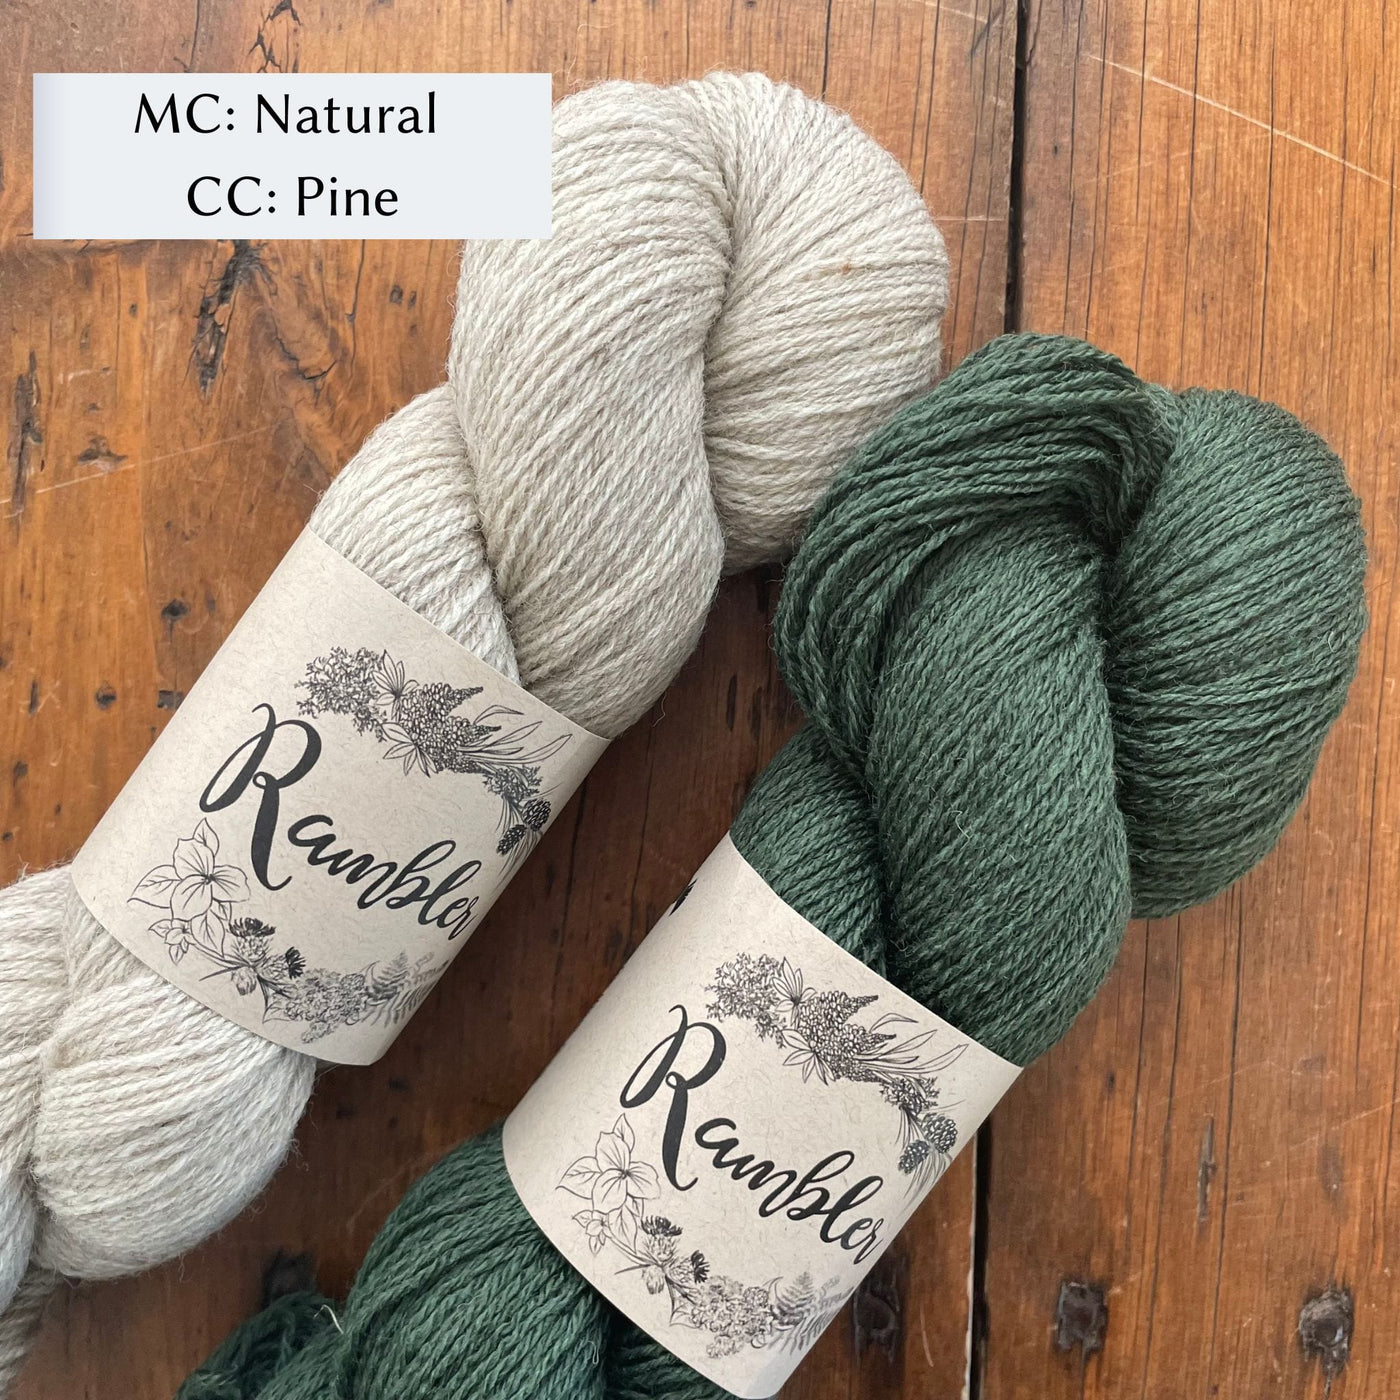 Forest Path Socks by Jessica McDonald in Rambler